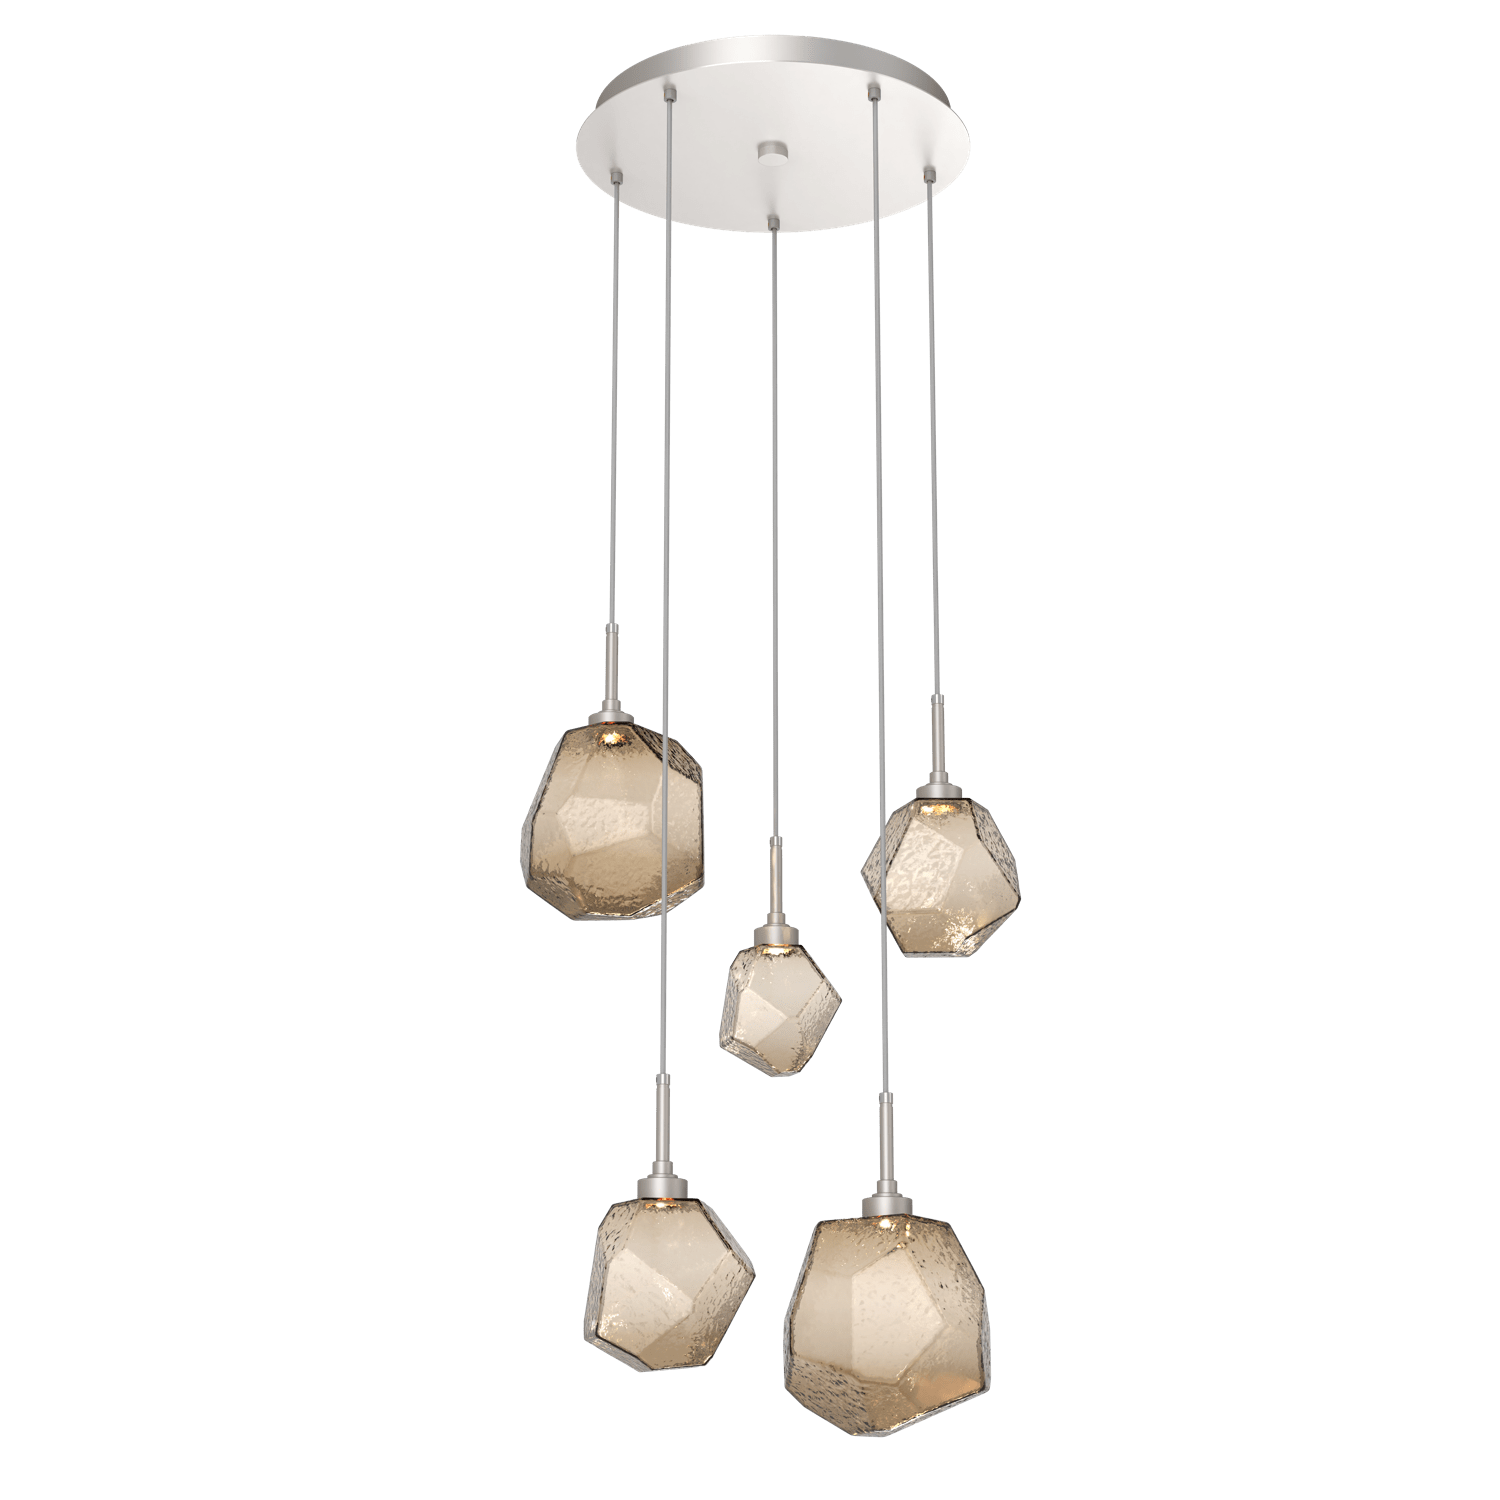 CHB0039-05-BS-B-Hammerton-Studio-Gem-5-light-round-pendant-chandelier-with-metallic-beige-silver-finish-and-bronze-blown-glass-shades-and-LED-lamping